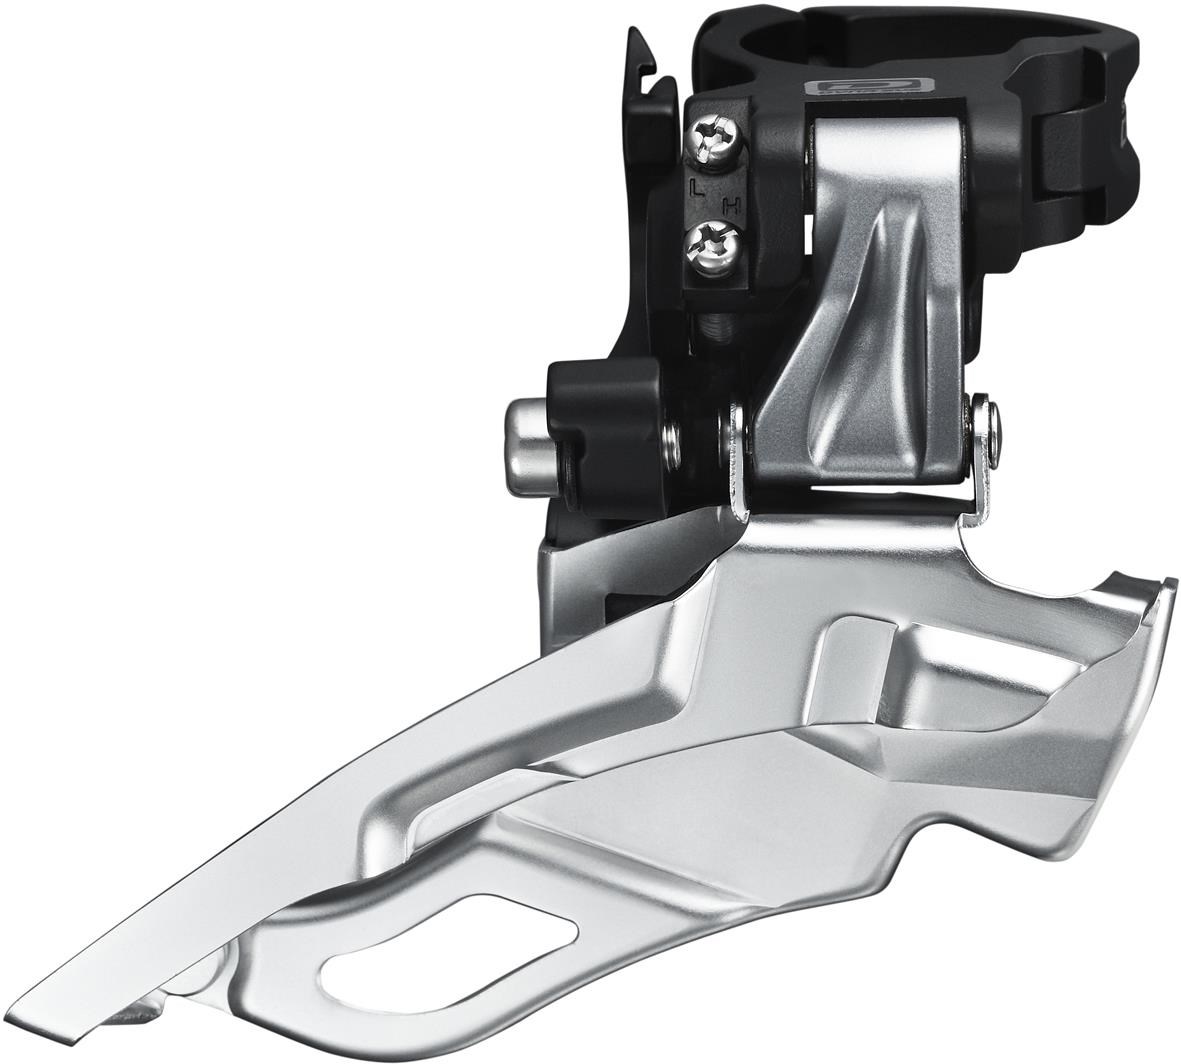 Shimano FD-M611 Deore 10-Speed Triple Front Derailleur - Conventional Swing - Top-Pull